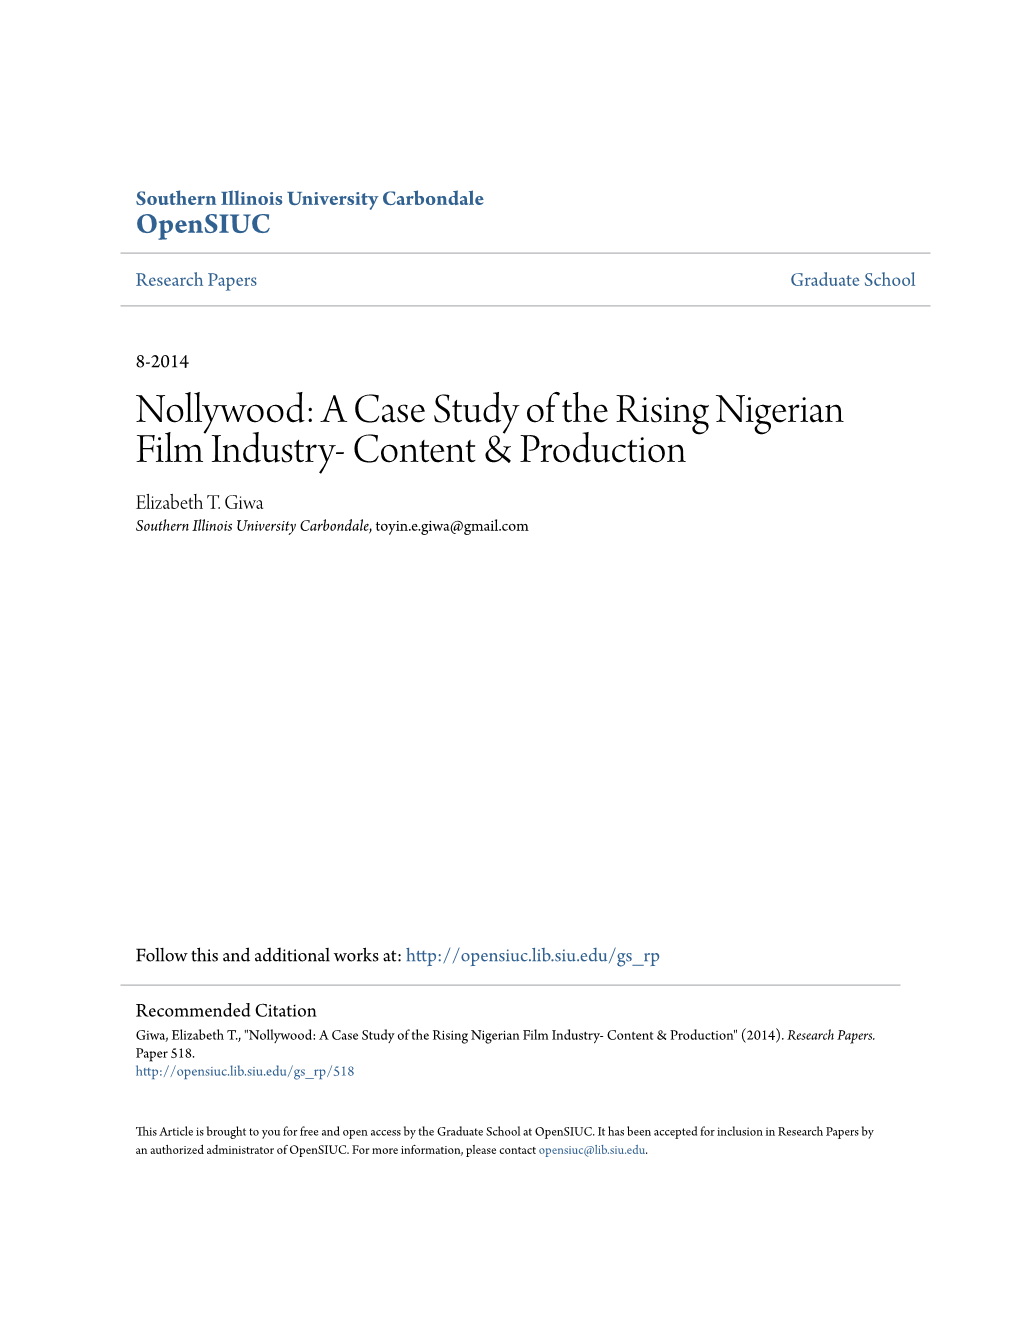 Nollywood: a Case Study of the Rising Nigerian Film Industry- Content & Production Elizabeth T